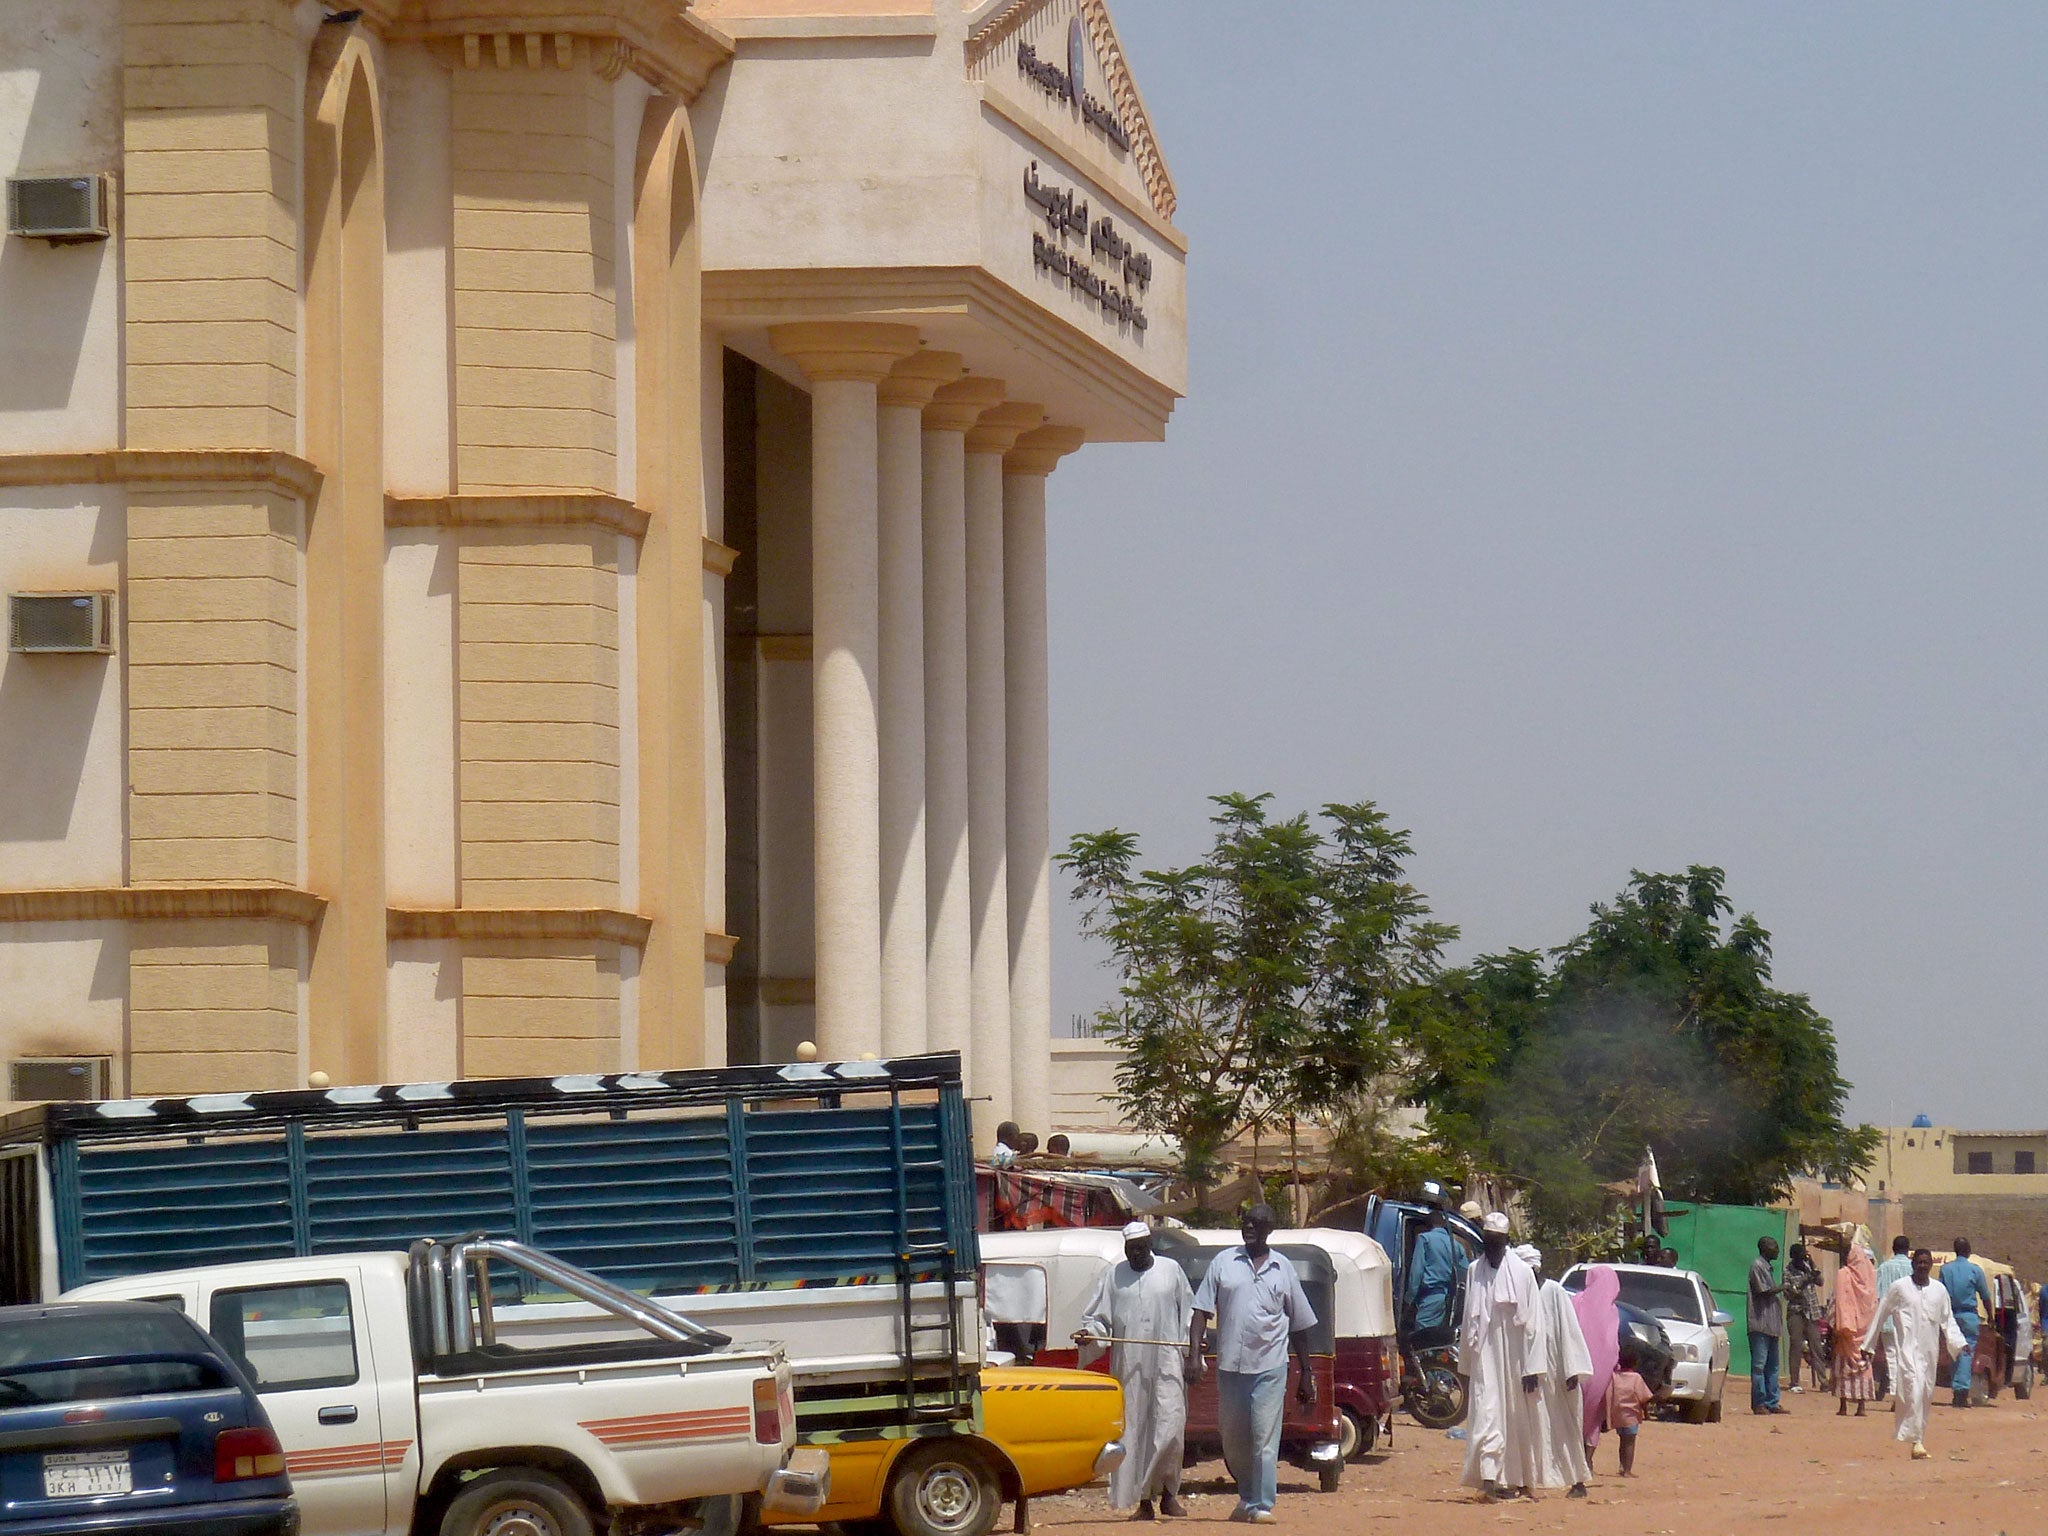 The courthouse in Haj Yousef district in the Sudanese capital Khartoum